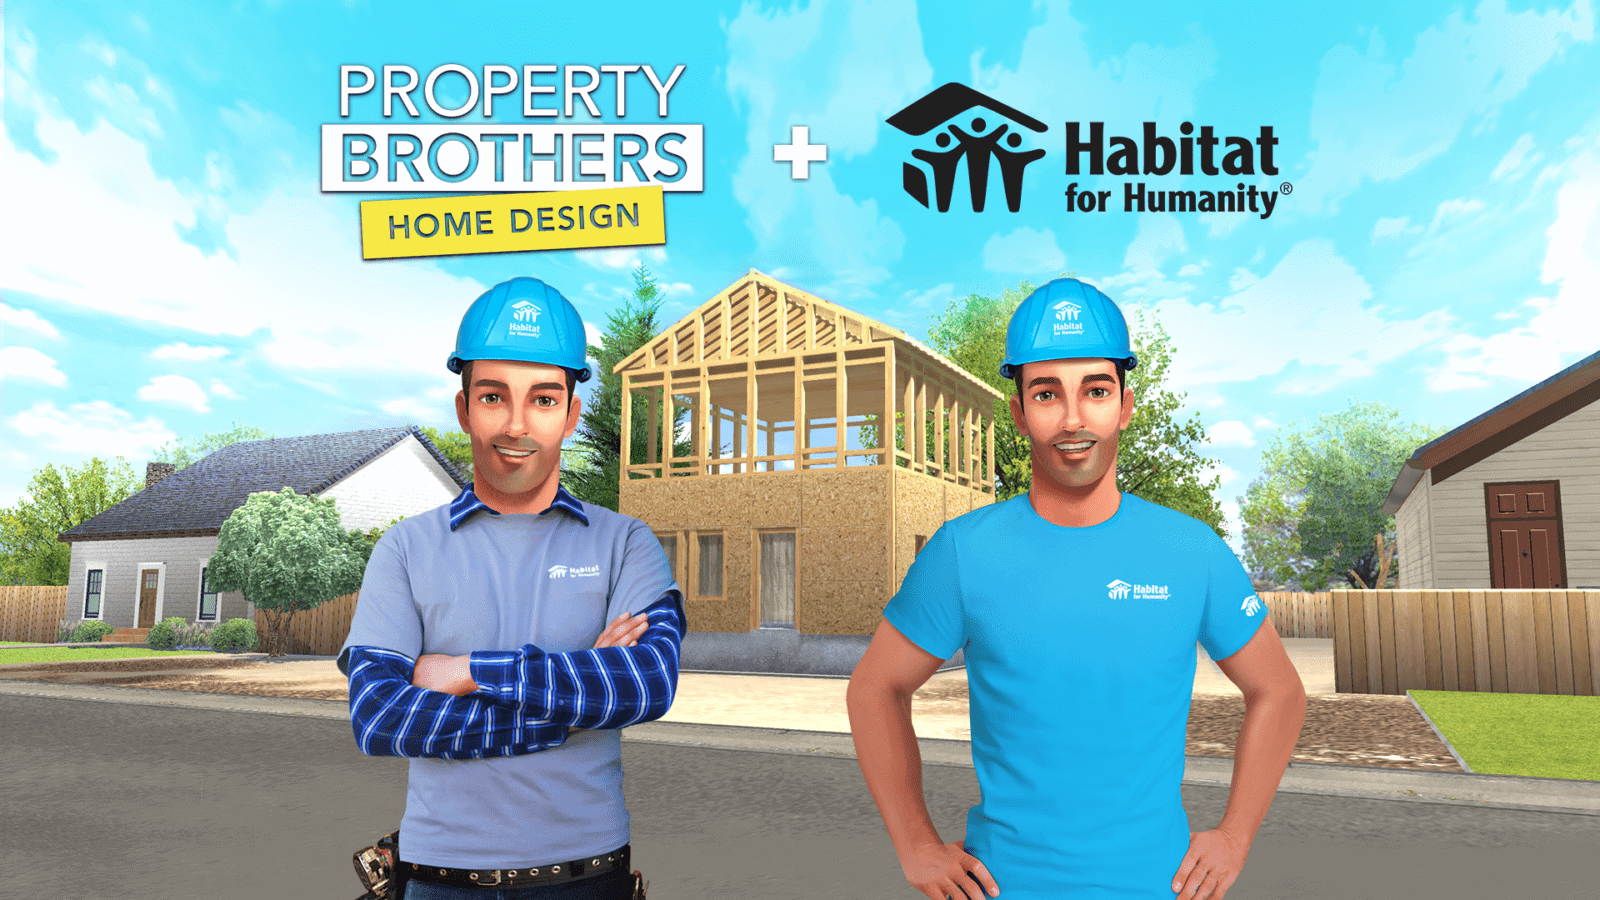 Play The Bros' Free Mobile Game and Help Habitat for Humanity!